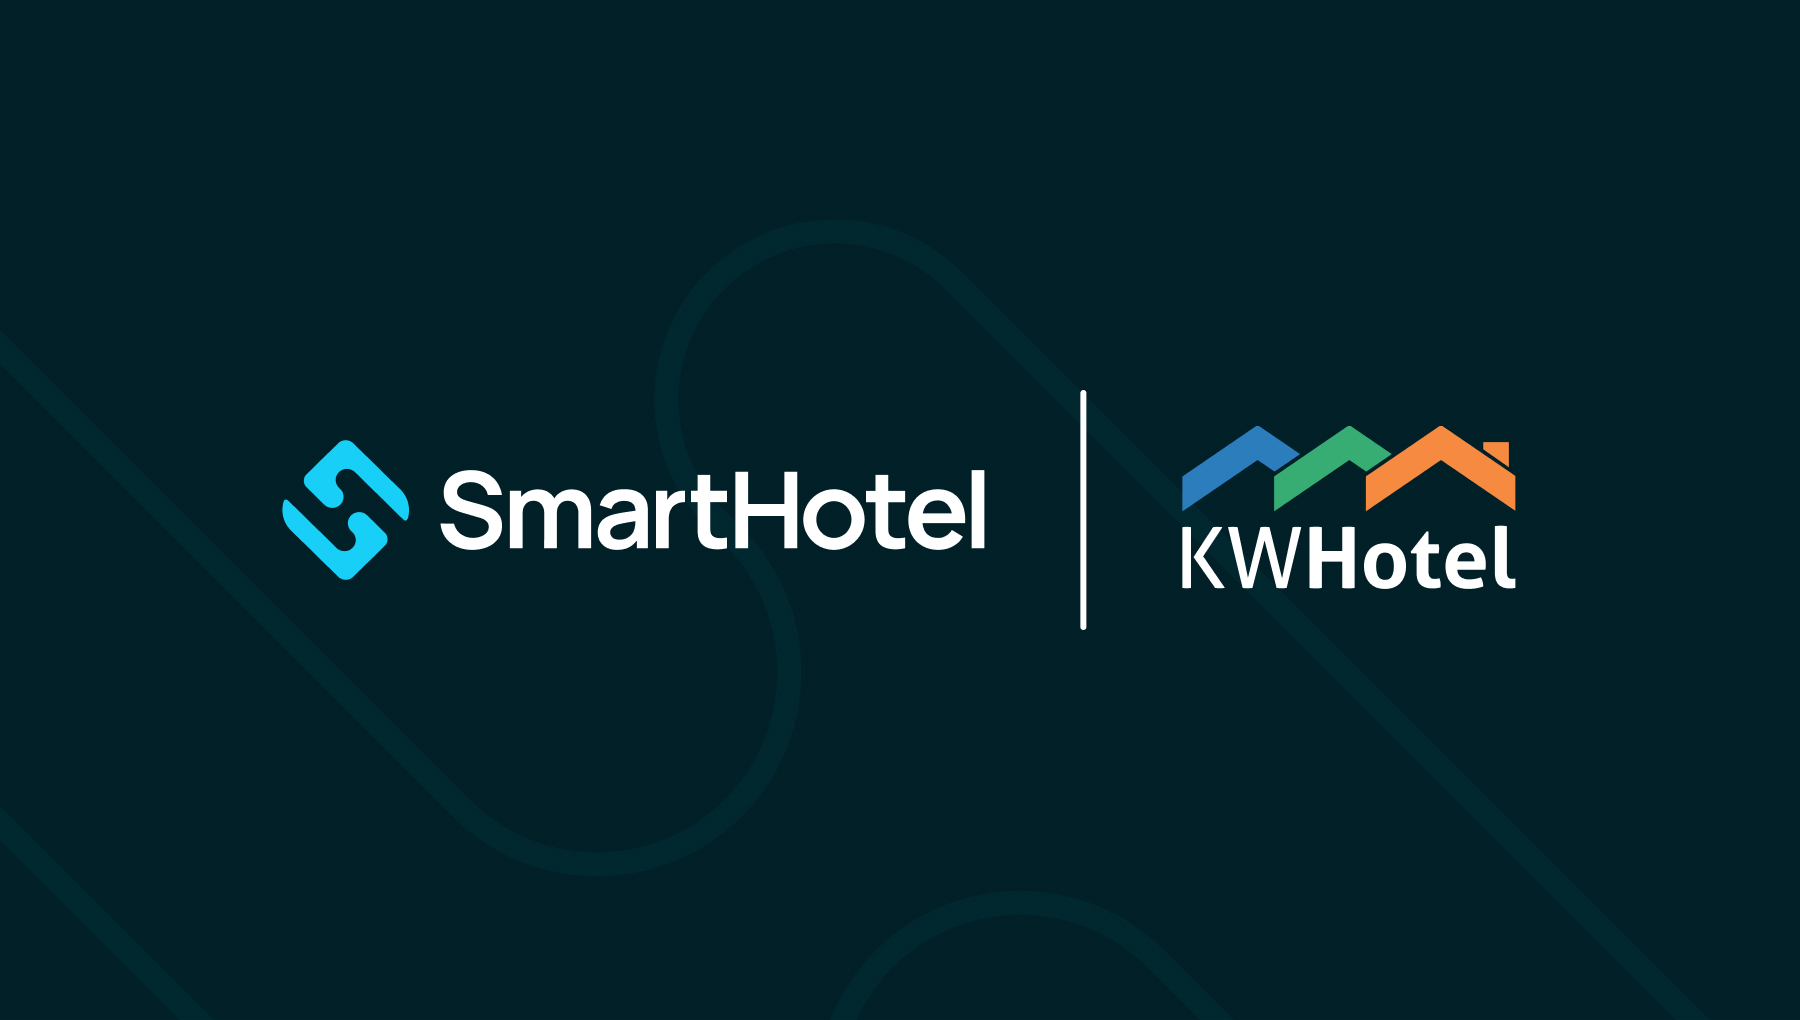 KW Hotel and SmartHotel – Integration of Essential Systems in the Era of Technology